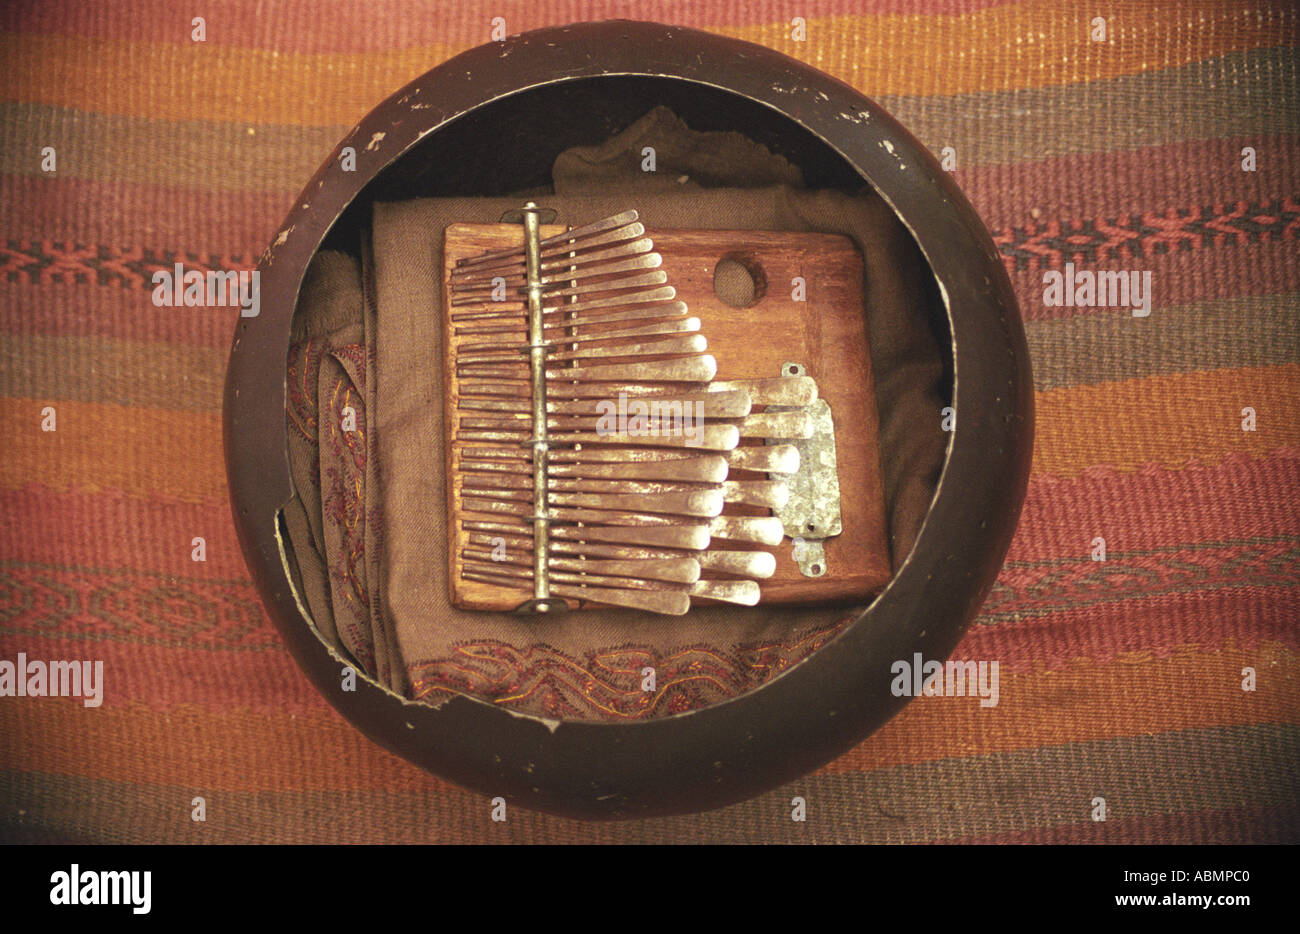 the beautiful shape of the mbira and gourde ready to play byron bay nsw australia Stock Photo